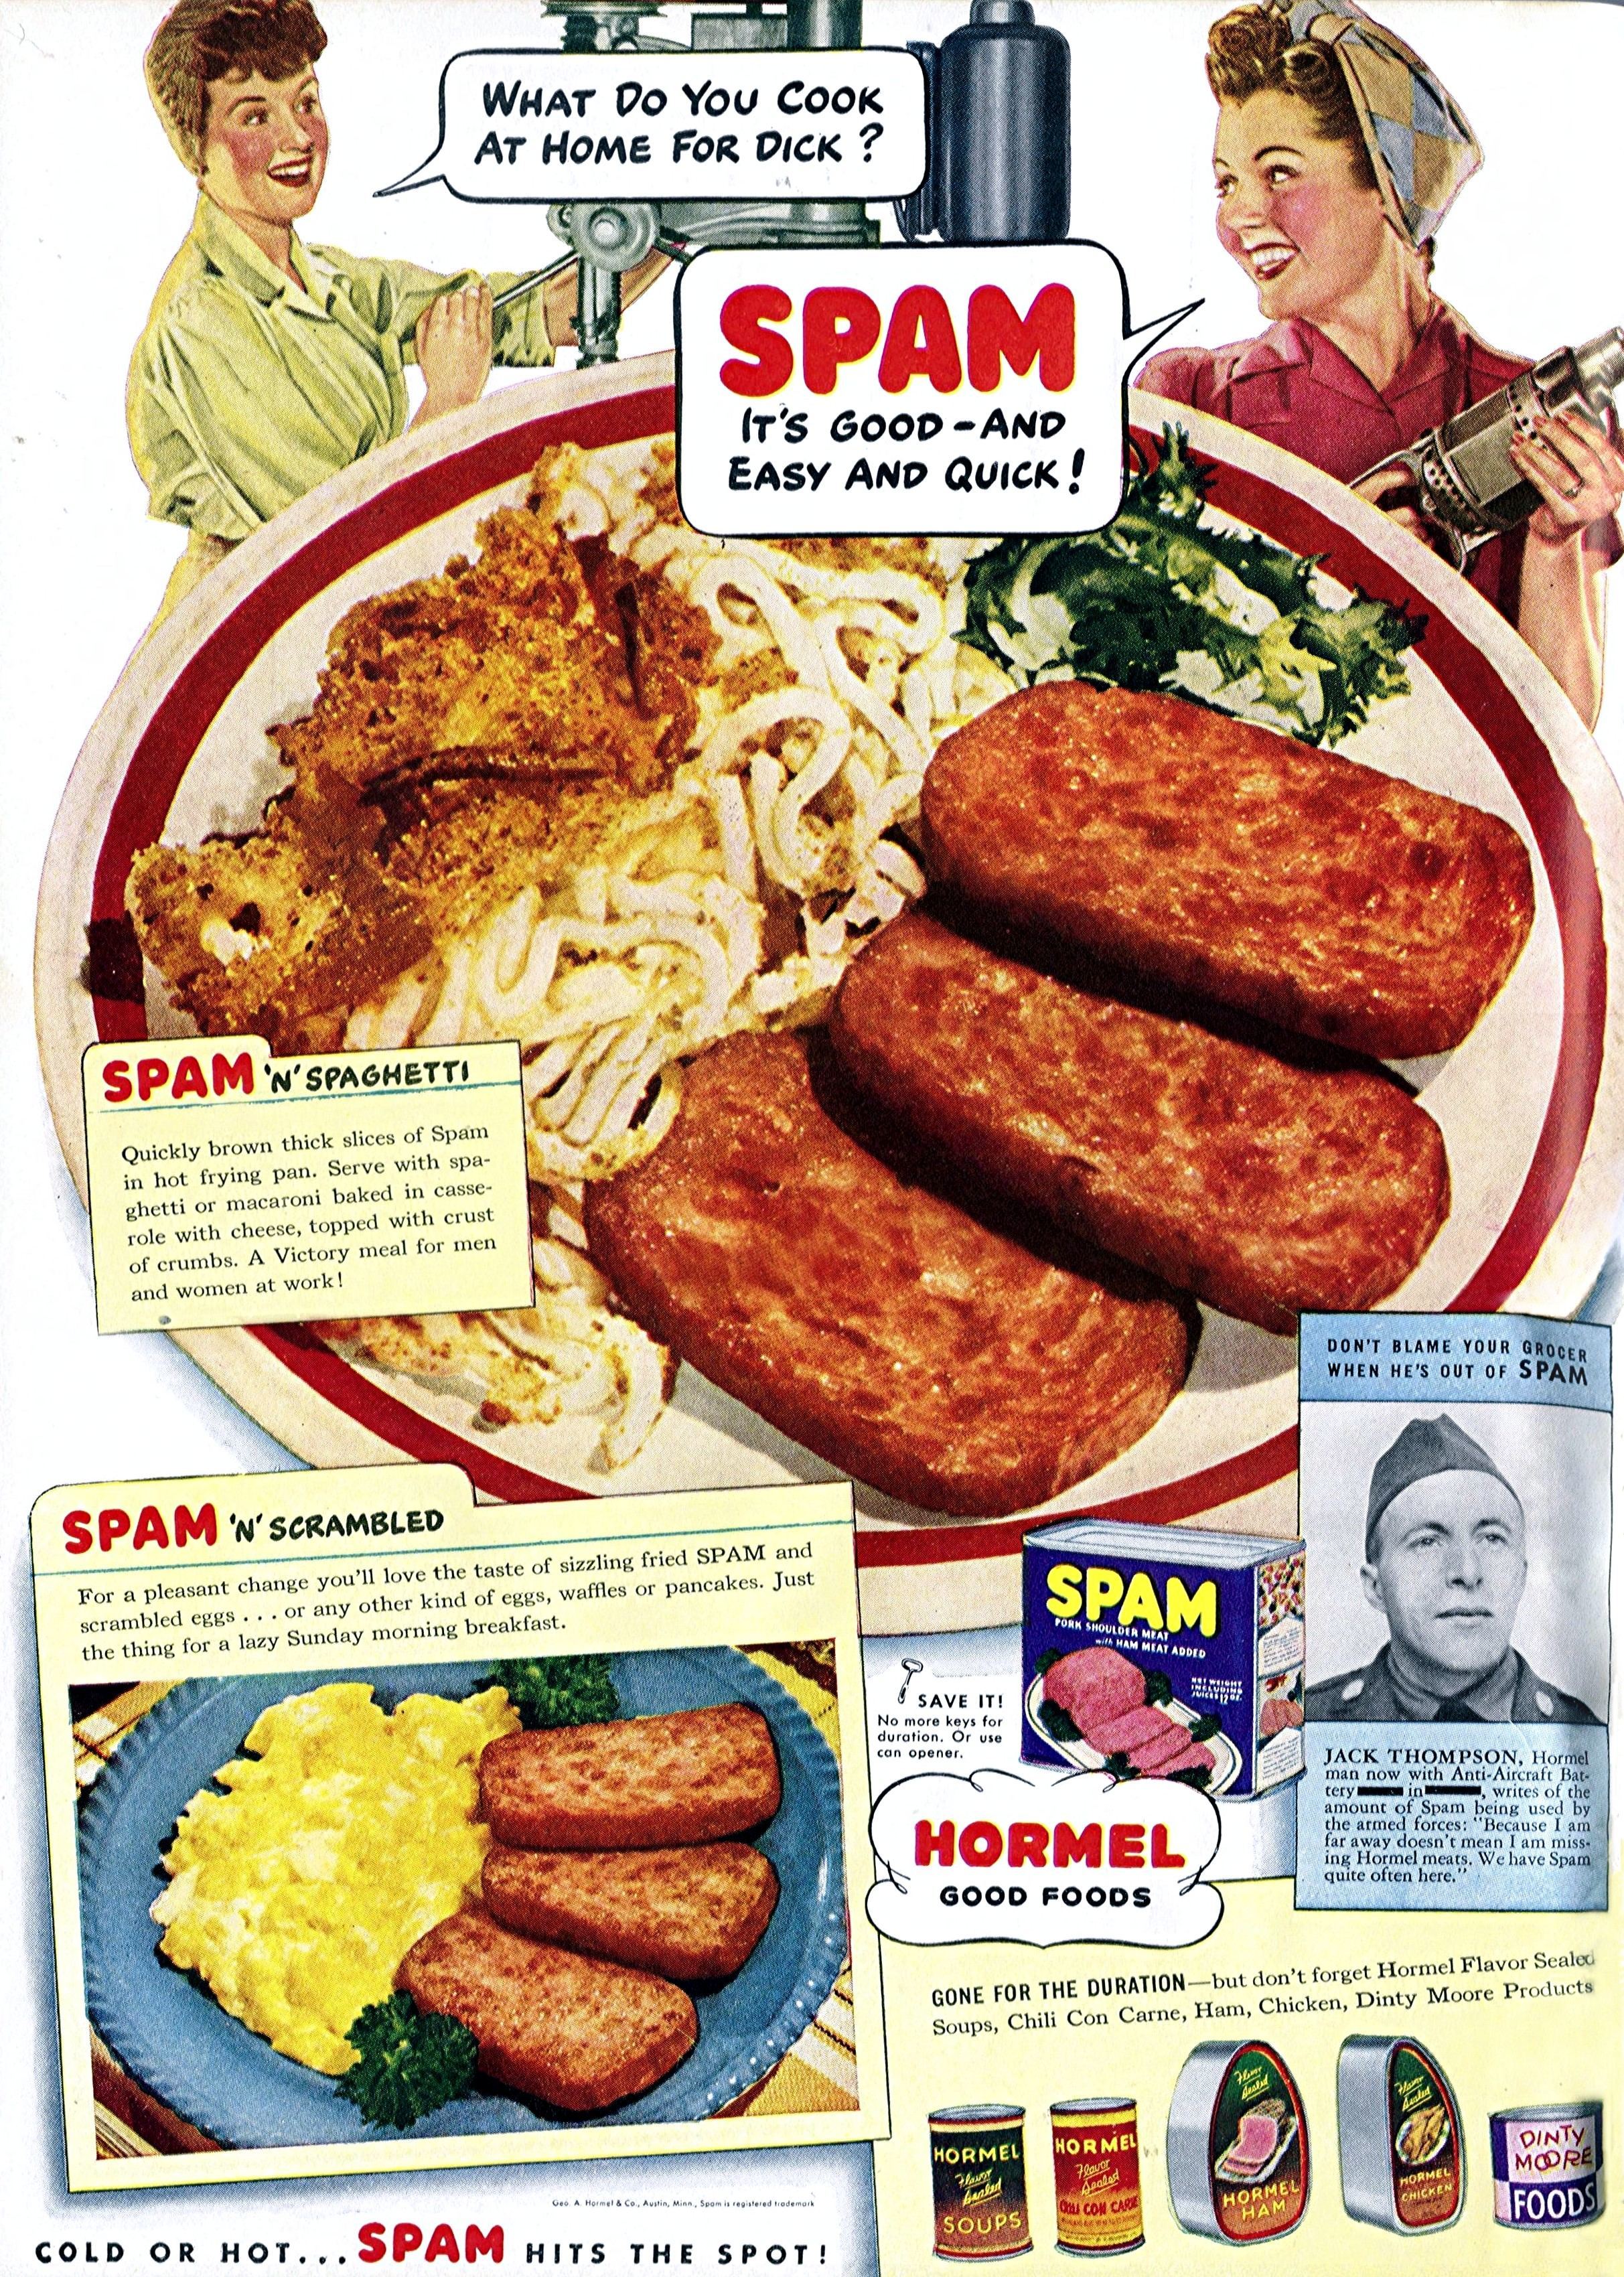 1943-Spam-for-Victory-Published-in-the-May-1943-issue-of-Womans-Day-magazine.jpg